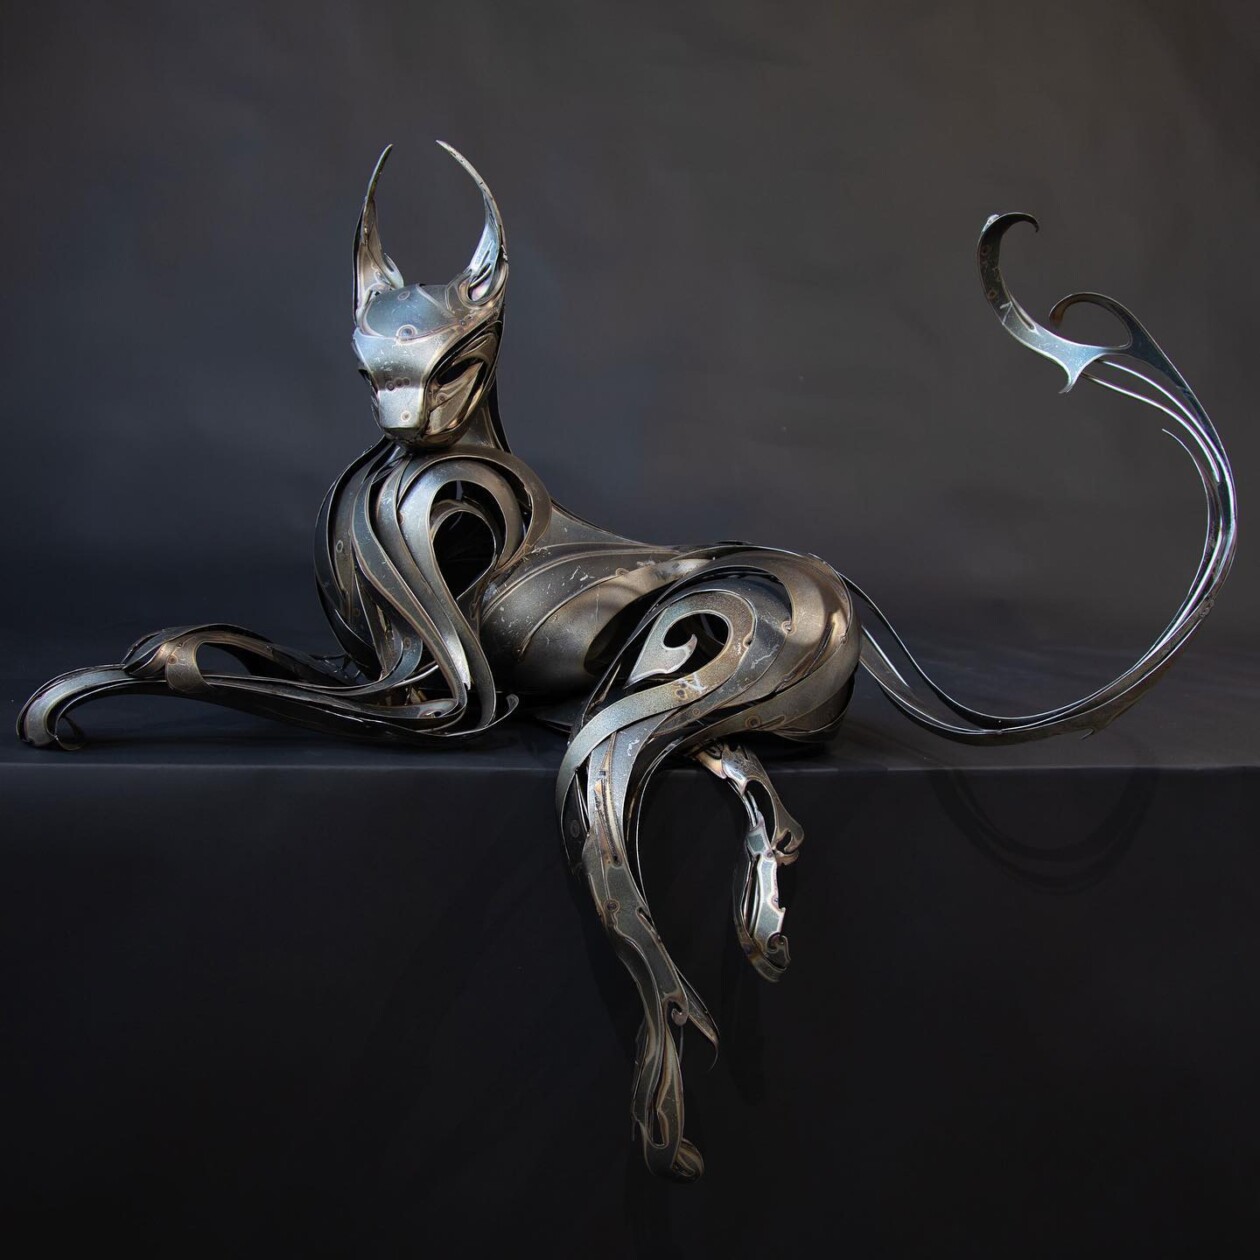 Magnificent Metallic Animal Sculptures Made With Sweeping Lines By Georgie Seccull (21)